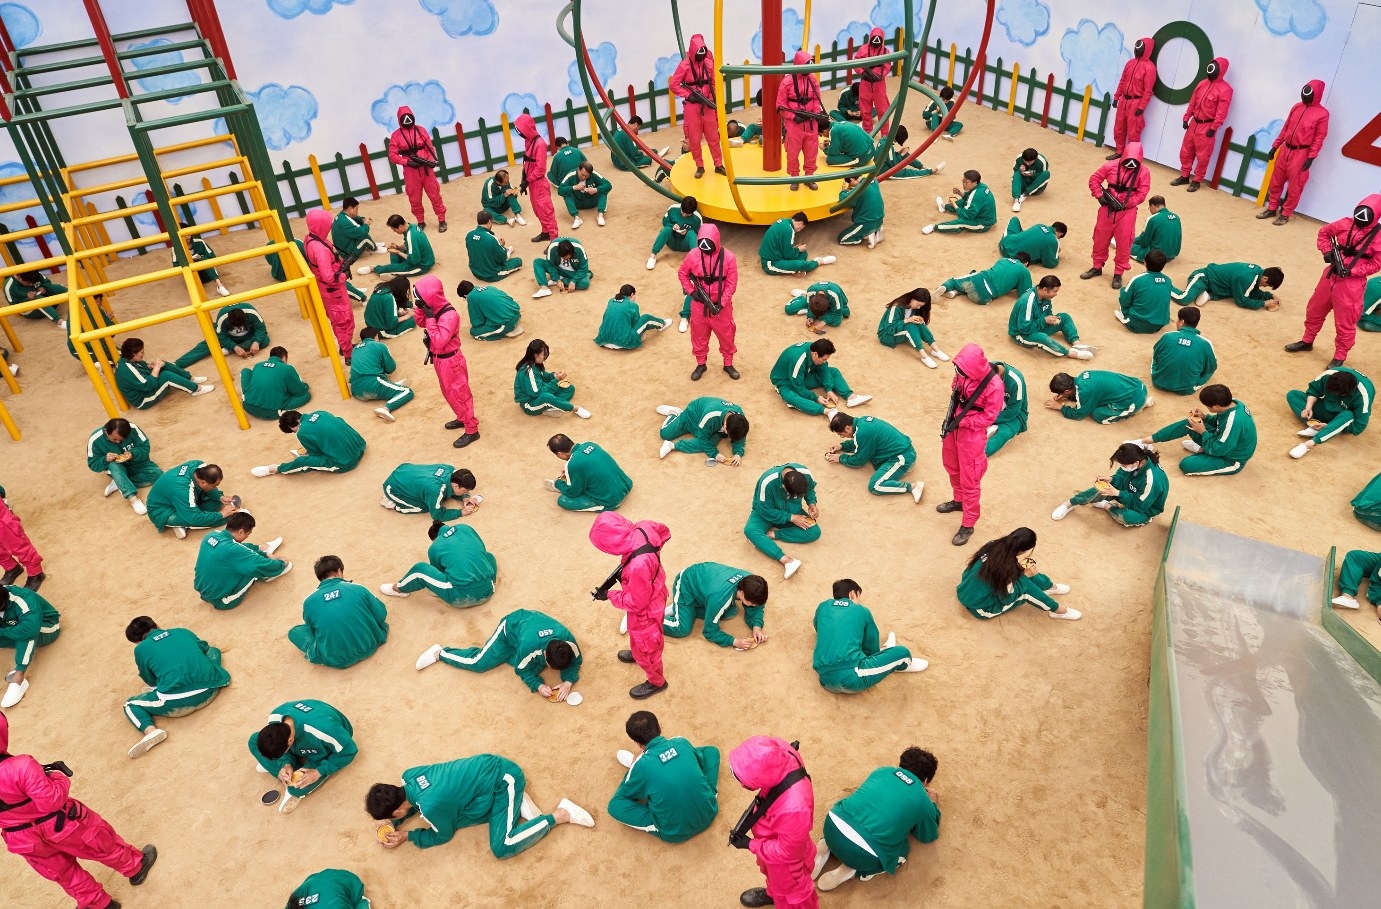 The contestants kneel on the ground in a huge playground set with the guards watching over them